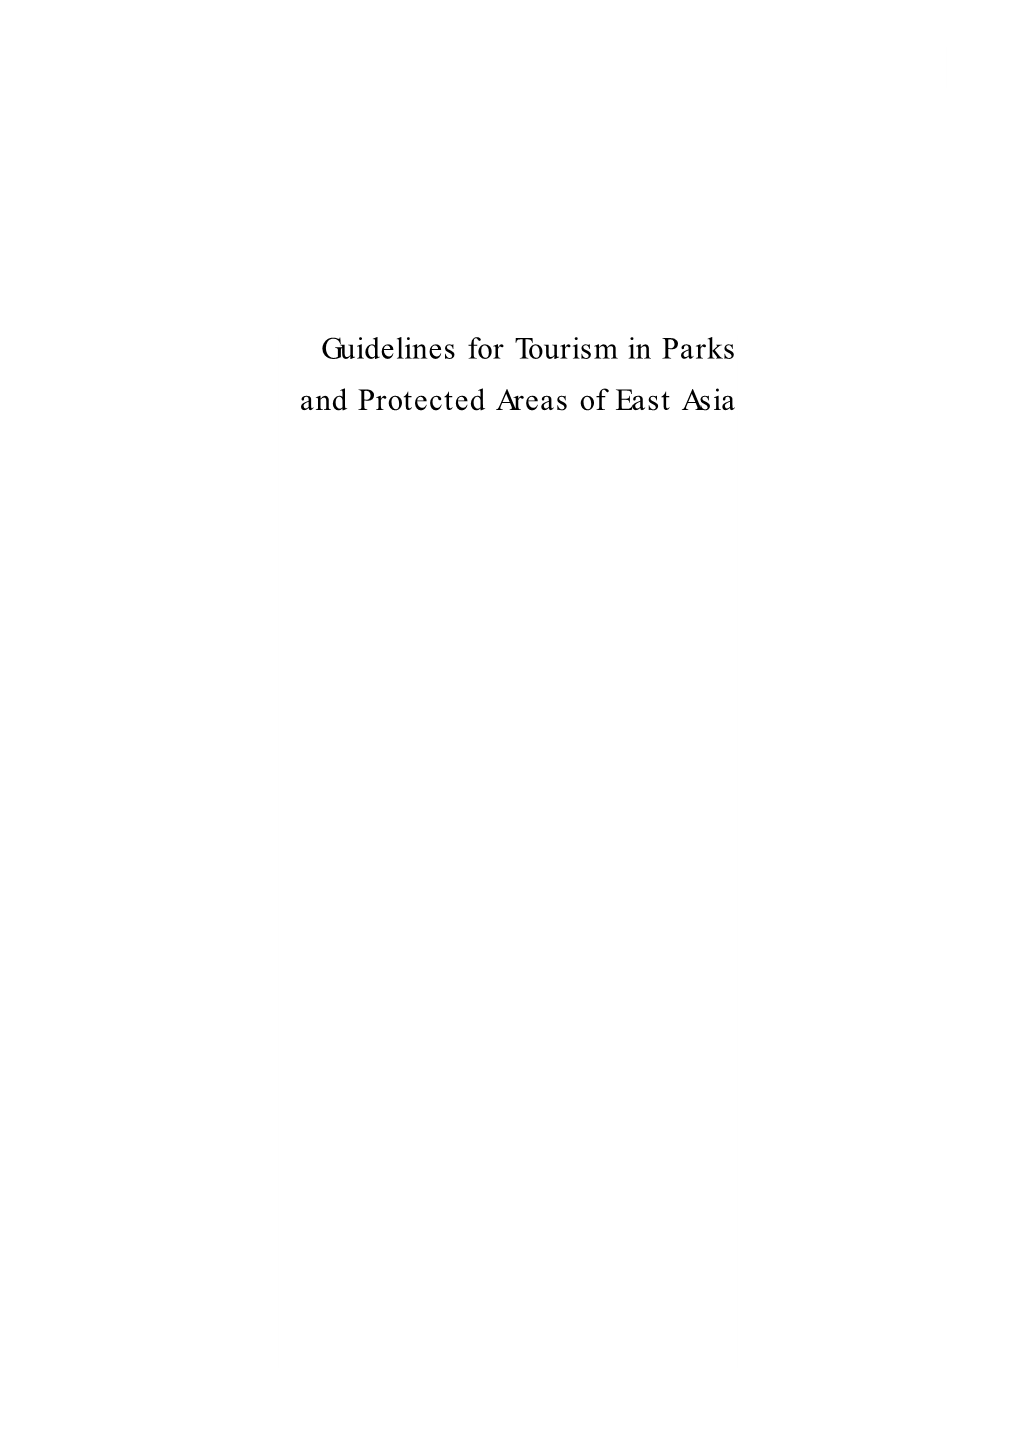 Guidelines for Tourism in Parks and Protected Areas of East Asia